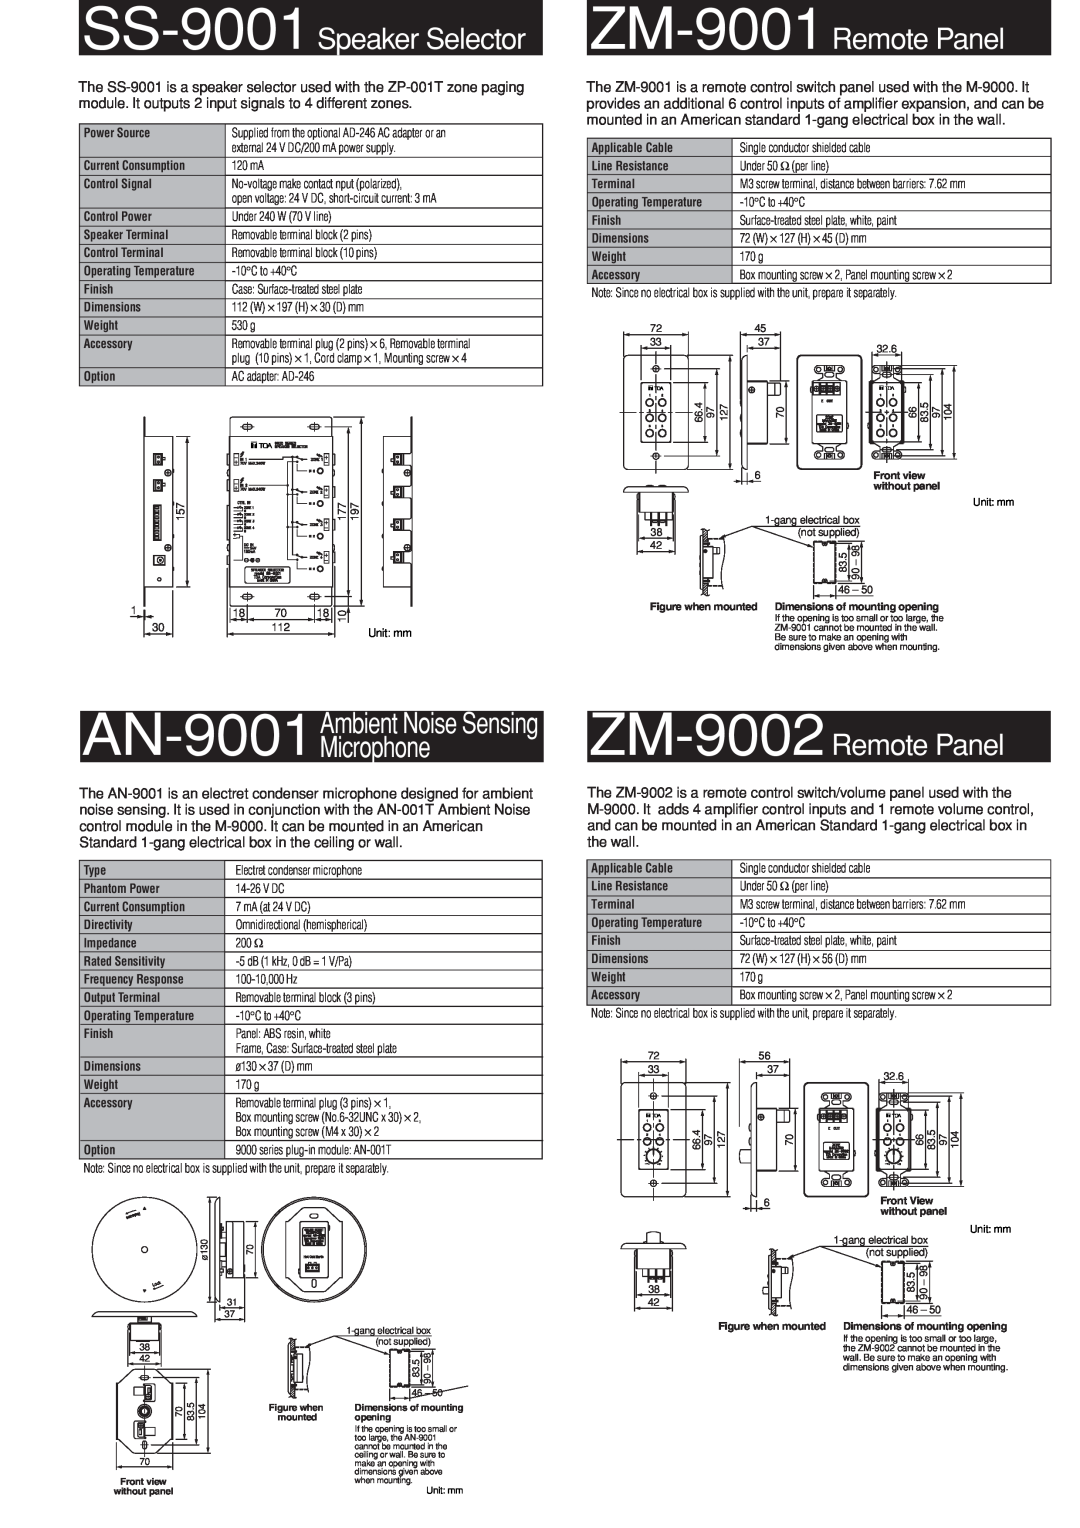 TOA Electronics M-9000 manual Ambient Noise Sensing, SS-9001 Speaker Selector, ZM-9001 Remote Panel, AN-9001Microphone 